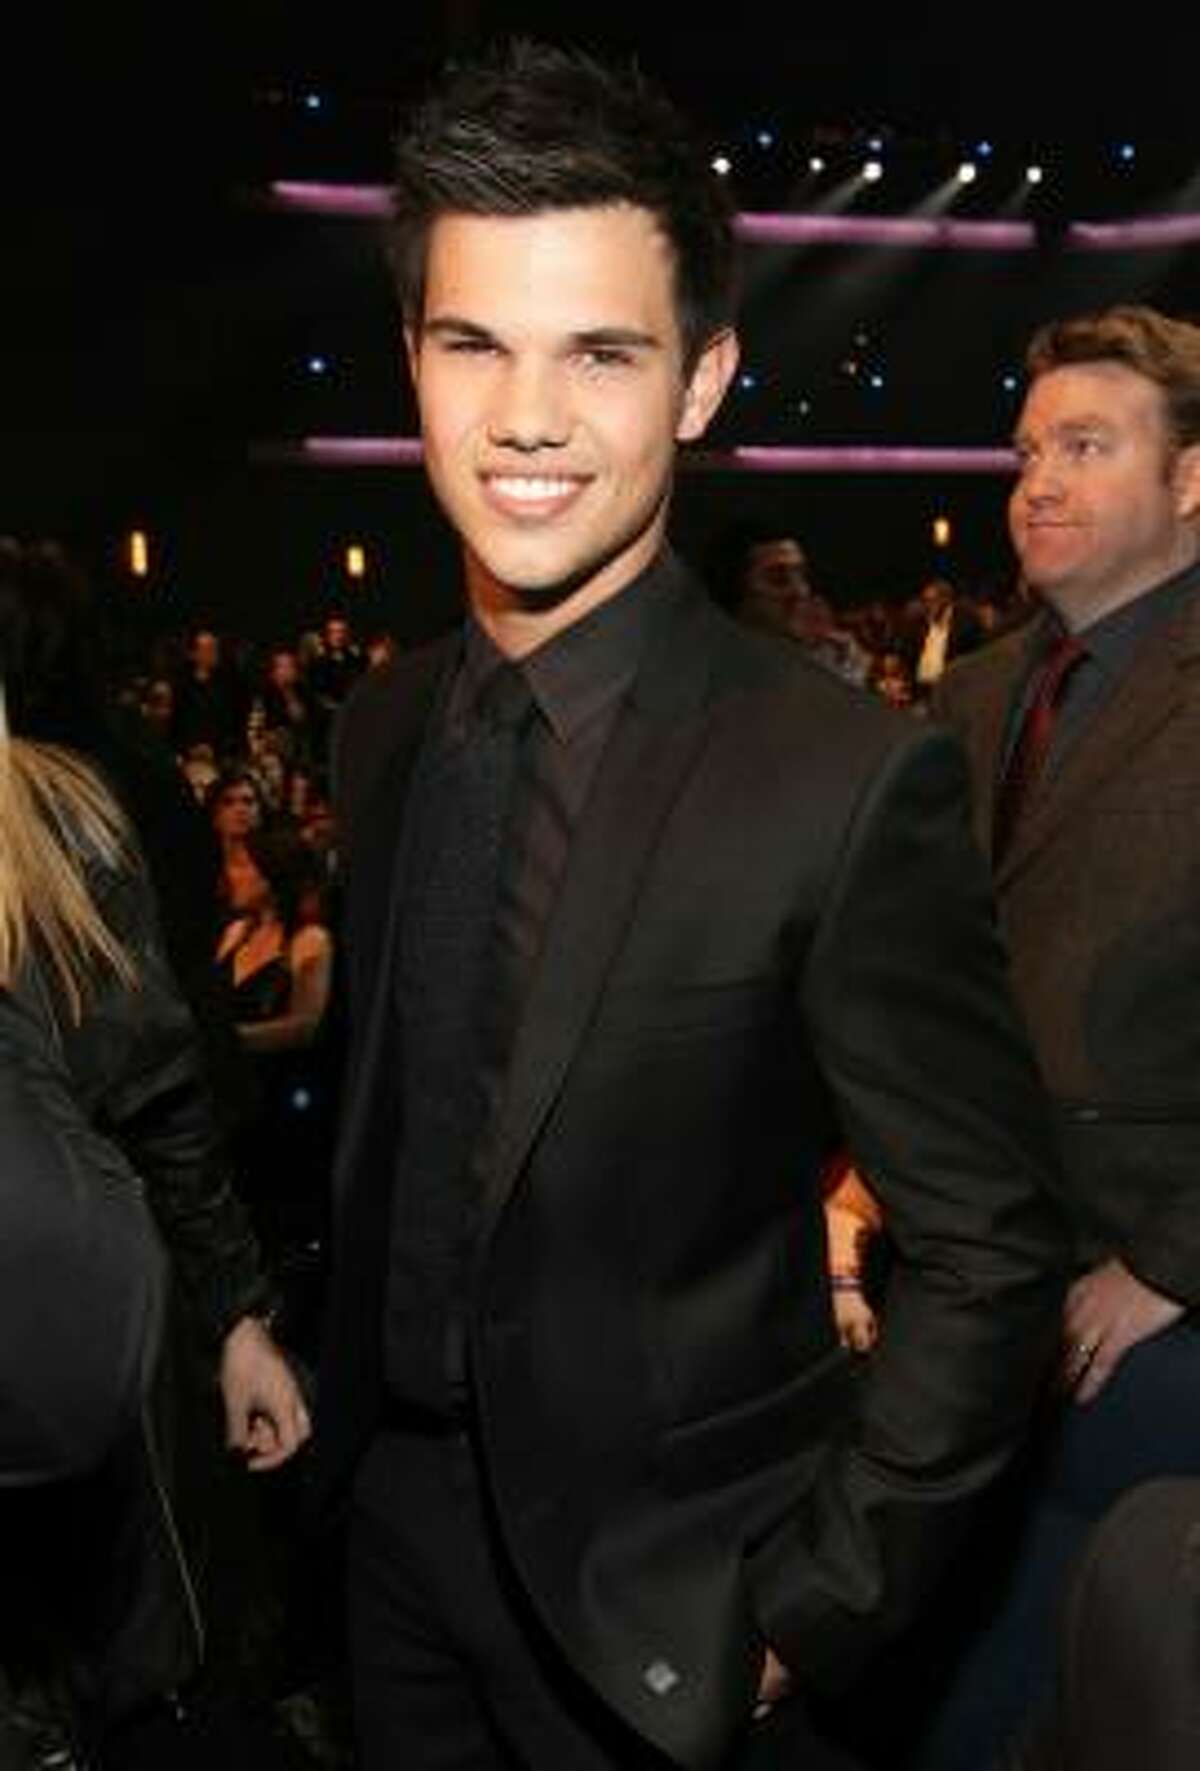 Actor Taylor Lautner from the Twilight series.